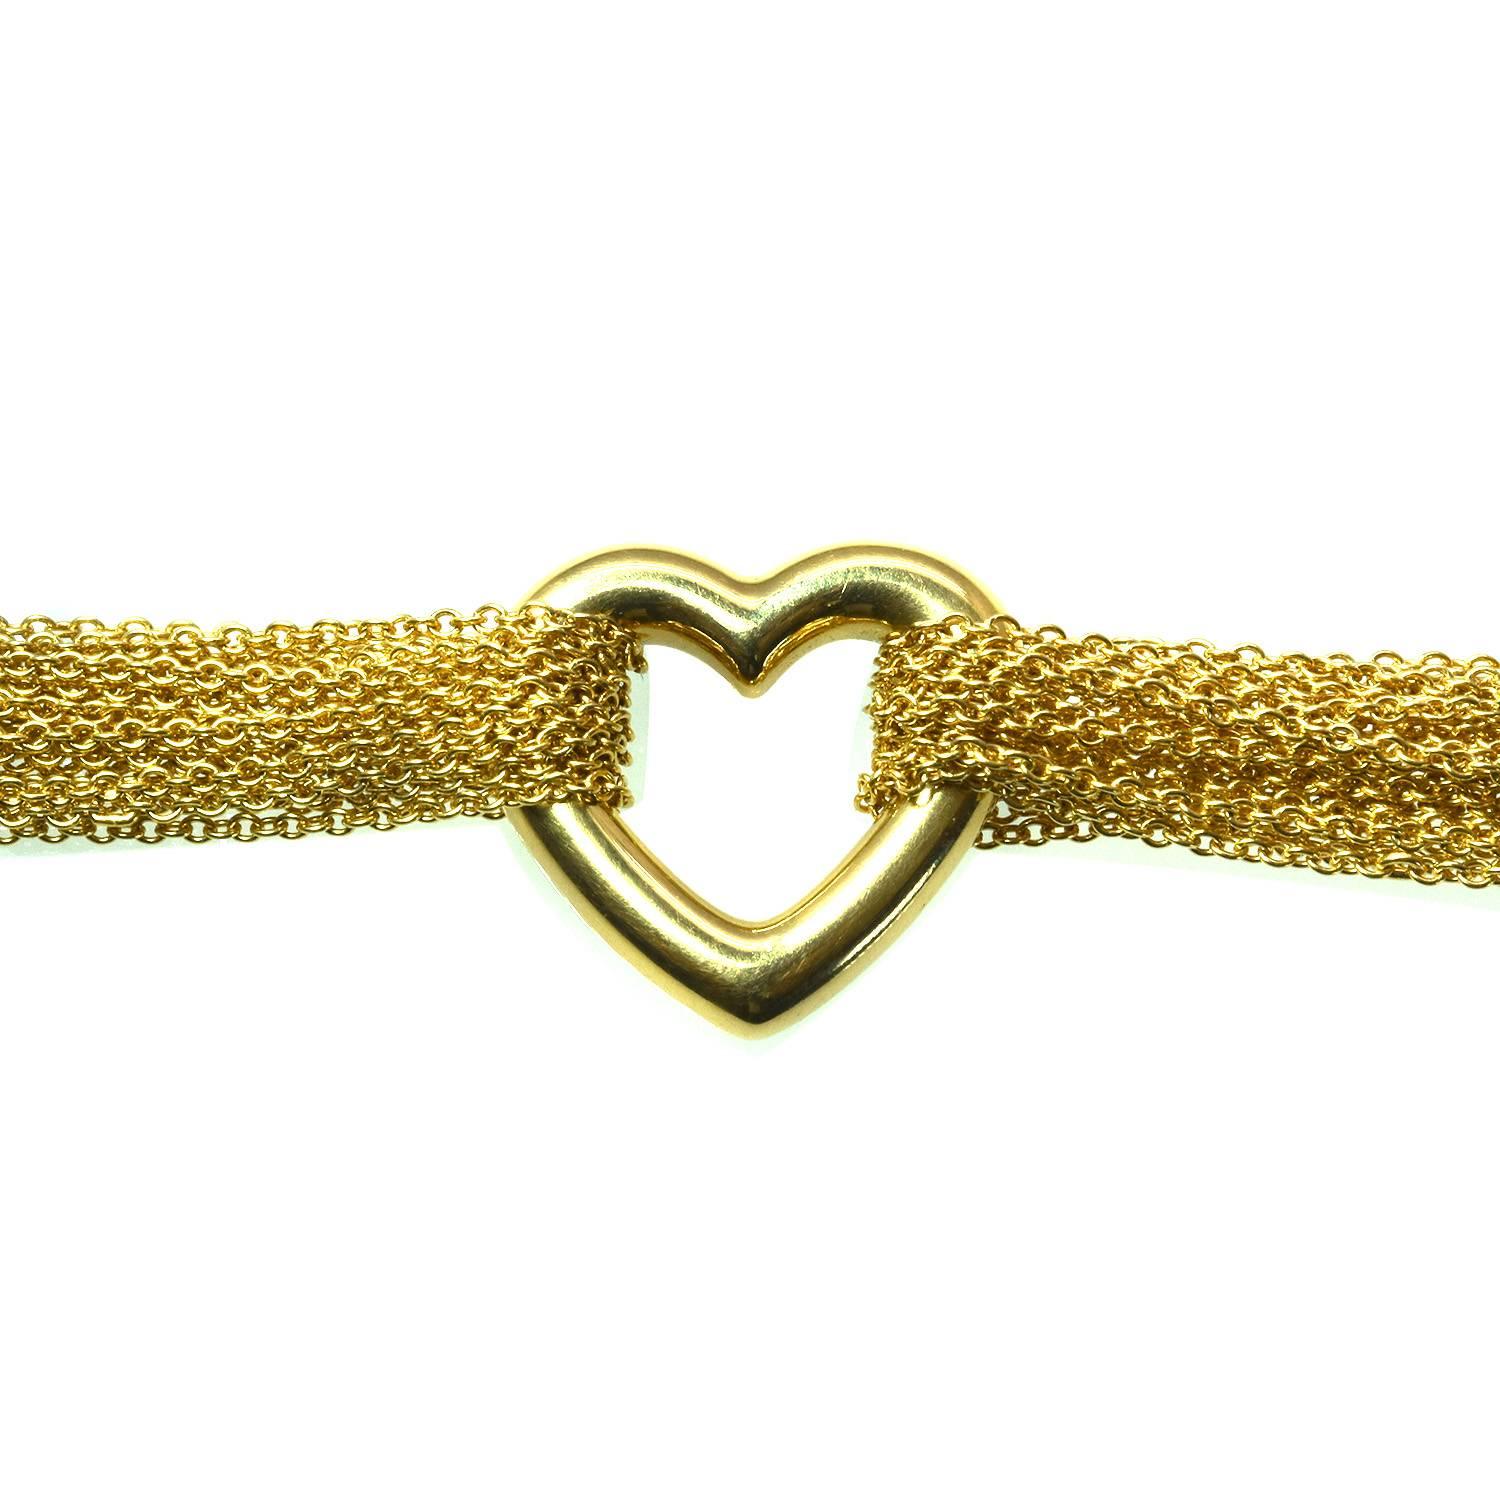 A gold multi-strand bracelet by Tiffany & Co featuring a gold heart center piece and toggle clasp done in 18k yellow gold and signed by Tiffany & Co. 